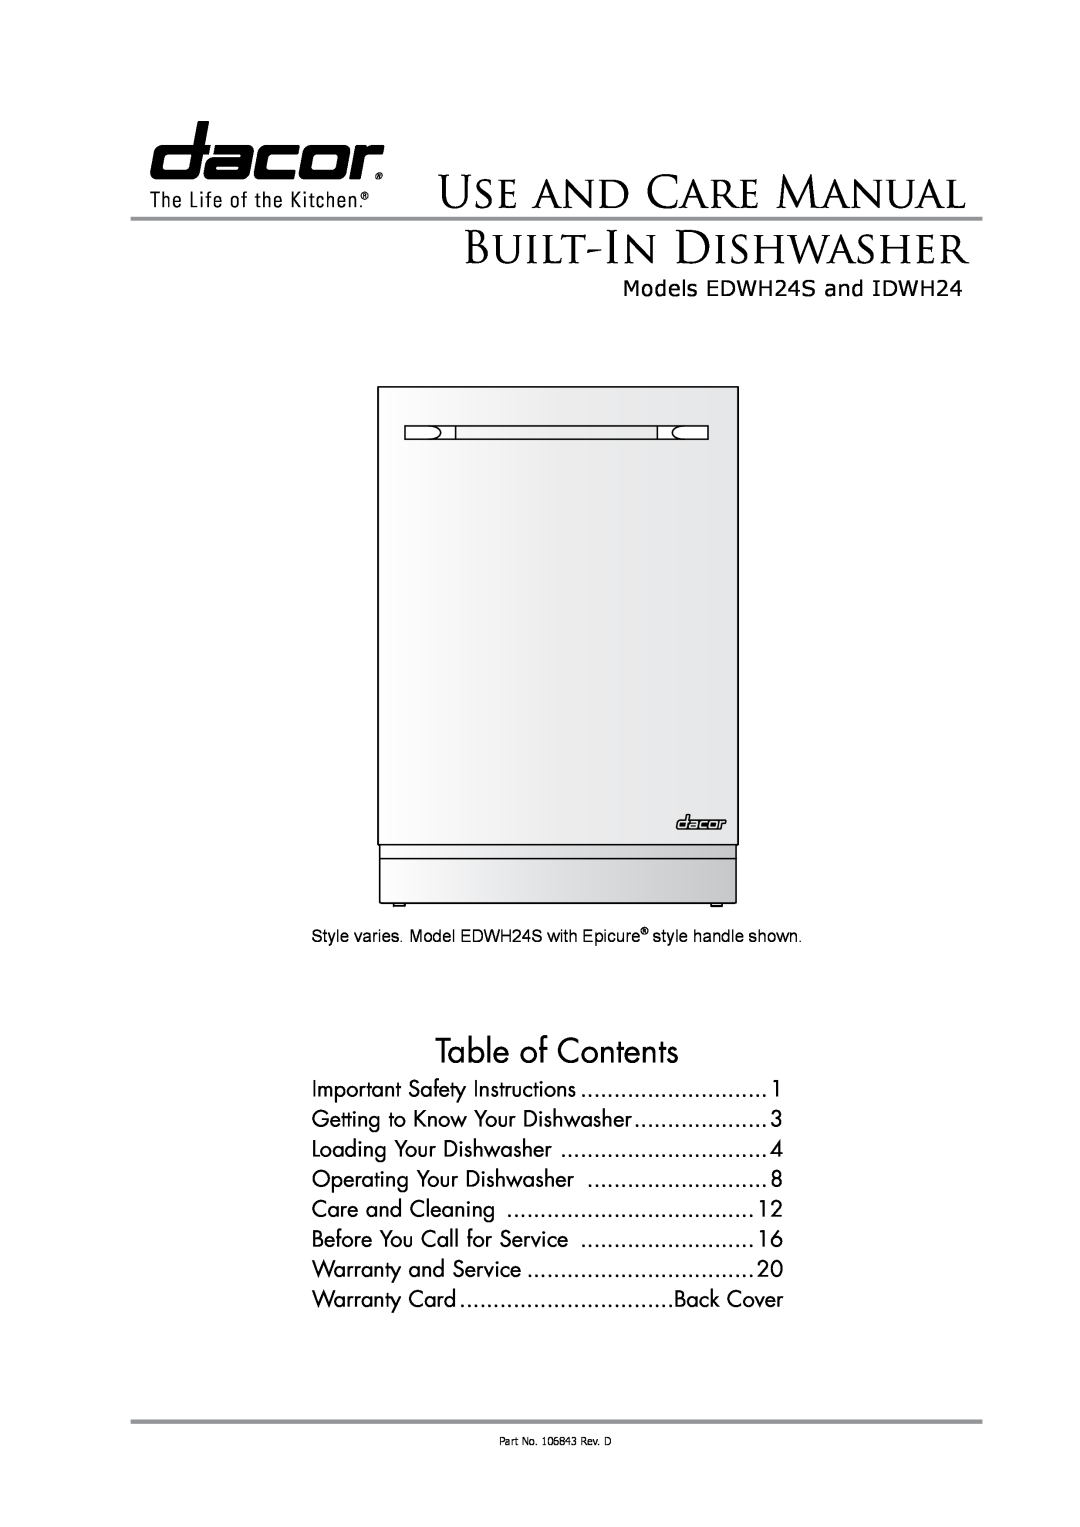 Dacor IDWH24, EDWH24S manual Table of Contents, Warranty Card, Back Cover, Use And Care Manual Built-In Dishwasher 